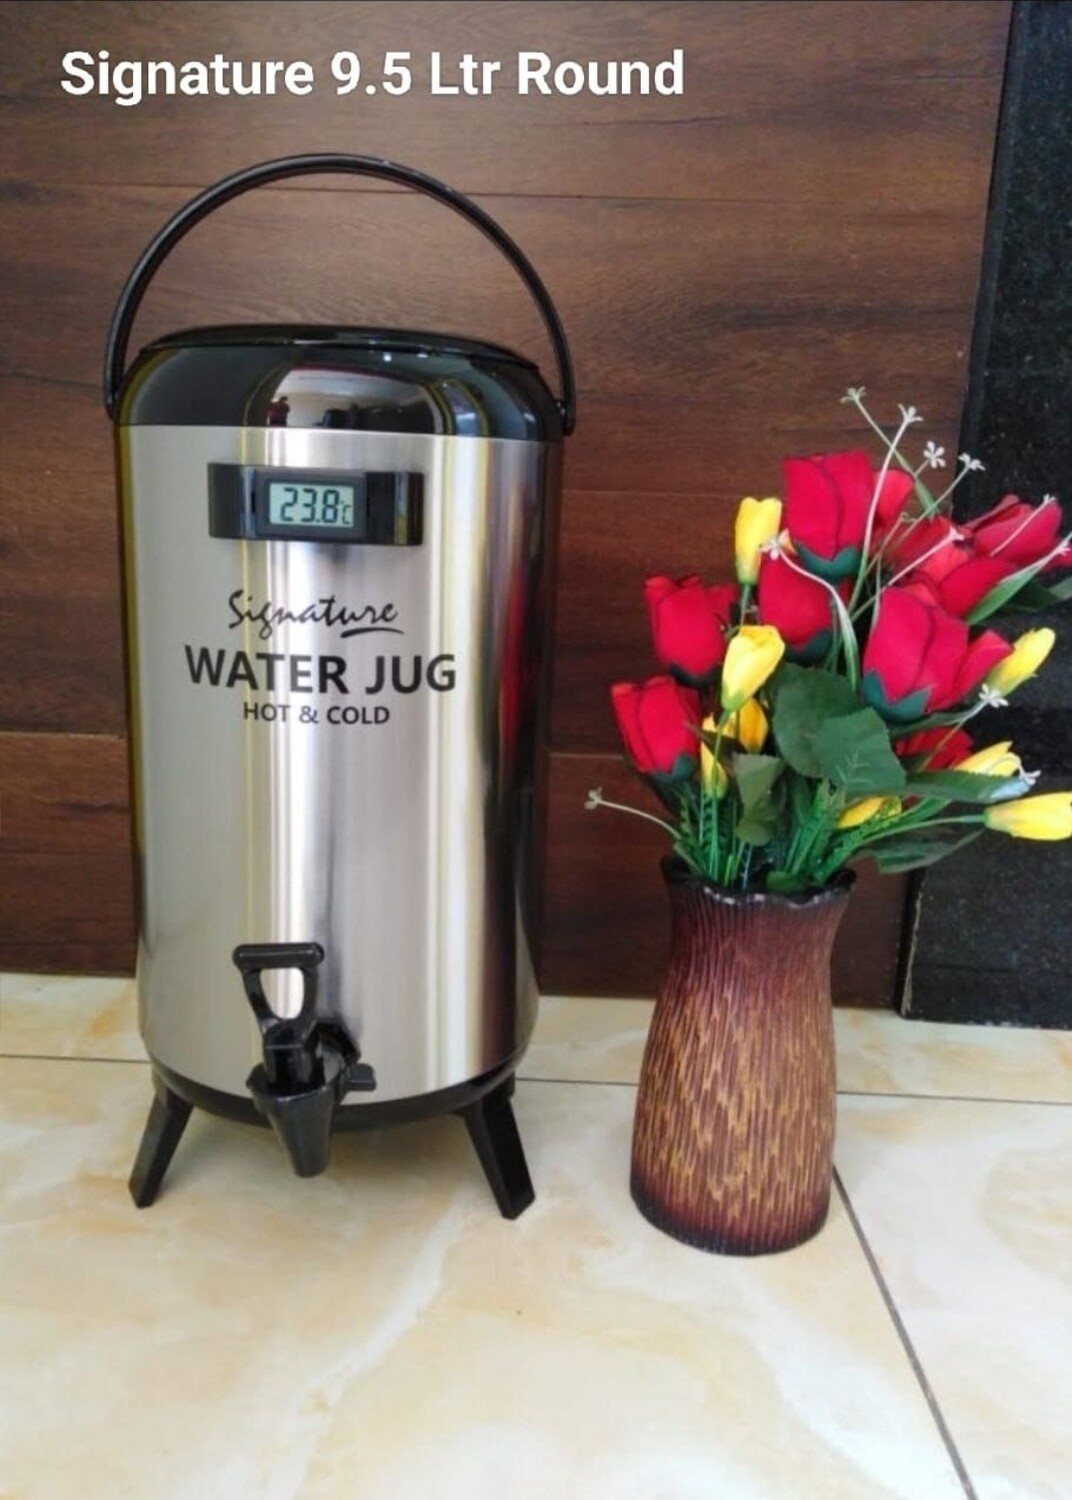 Signature 9.5L tea urn with stand round